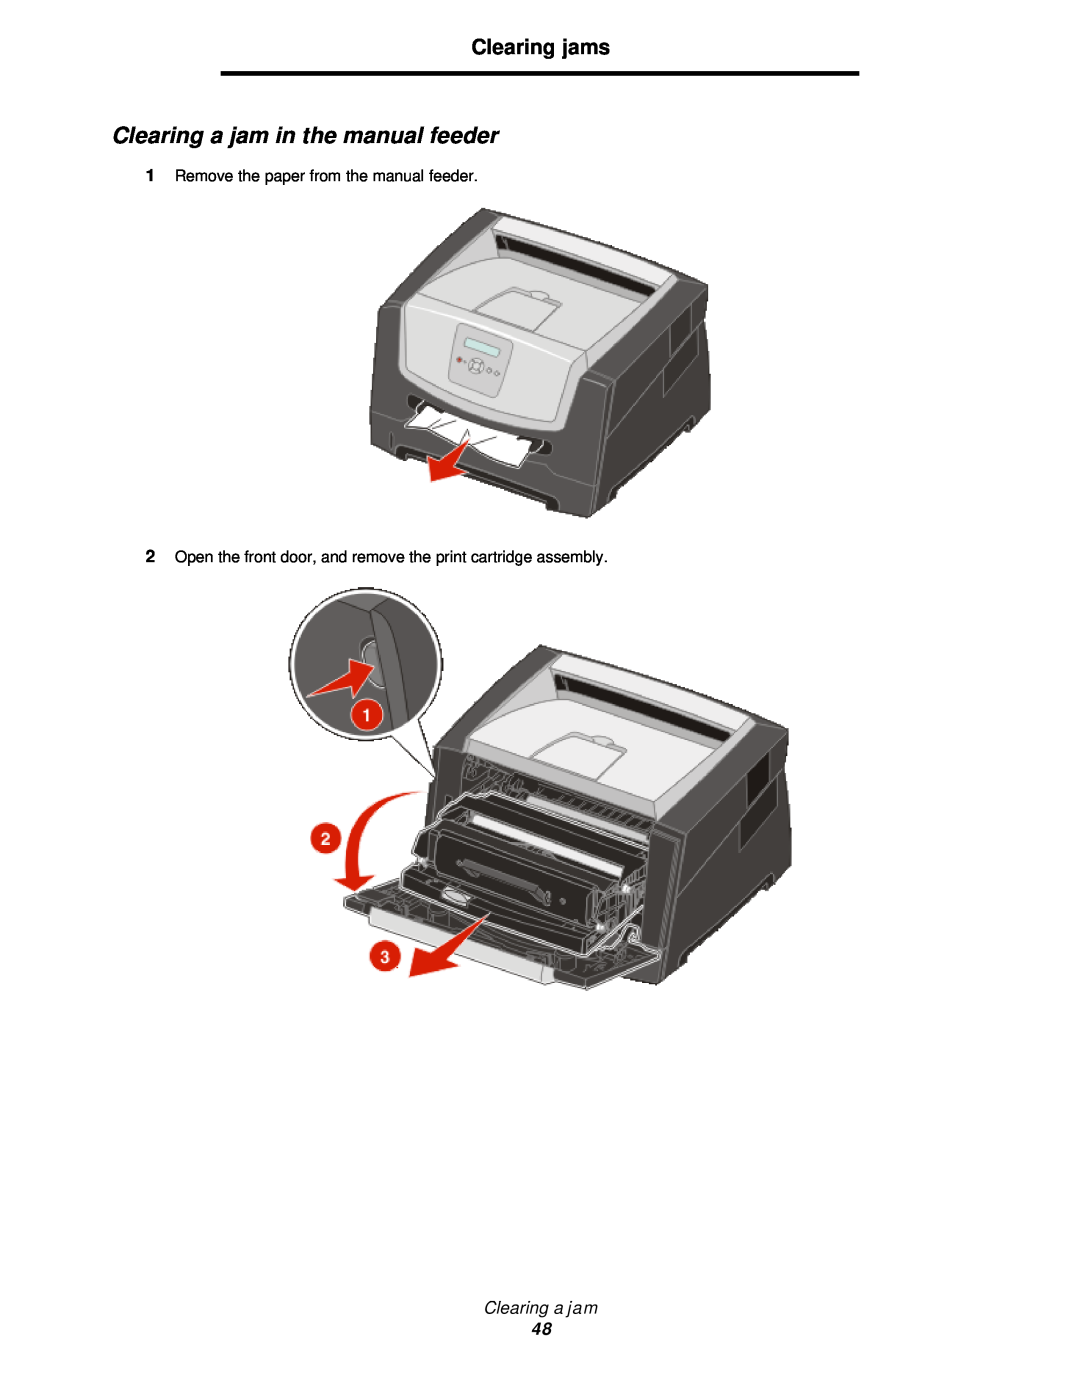 Lexmark 350d Clearing a jam in the manual feeder, Clearing jams, Remove the paper from the manual feeder 